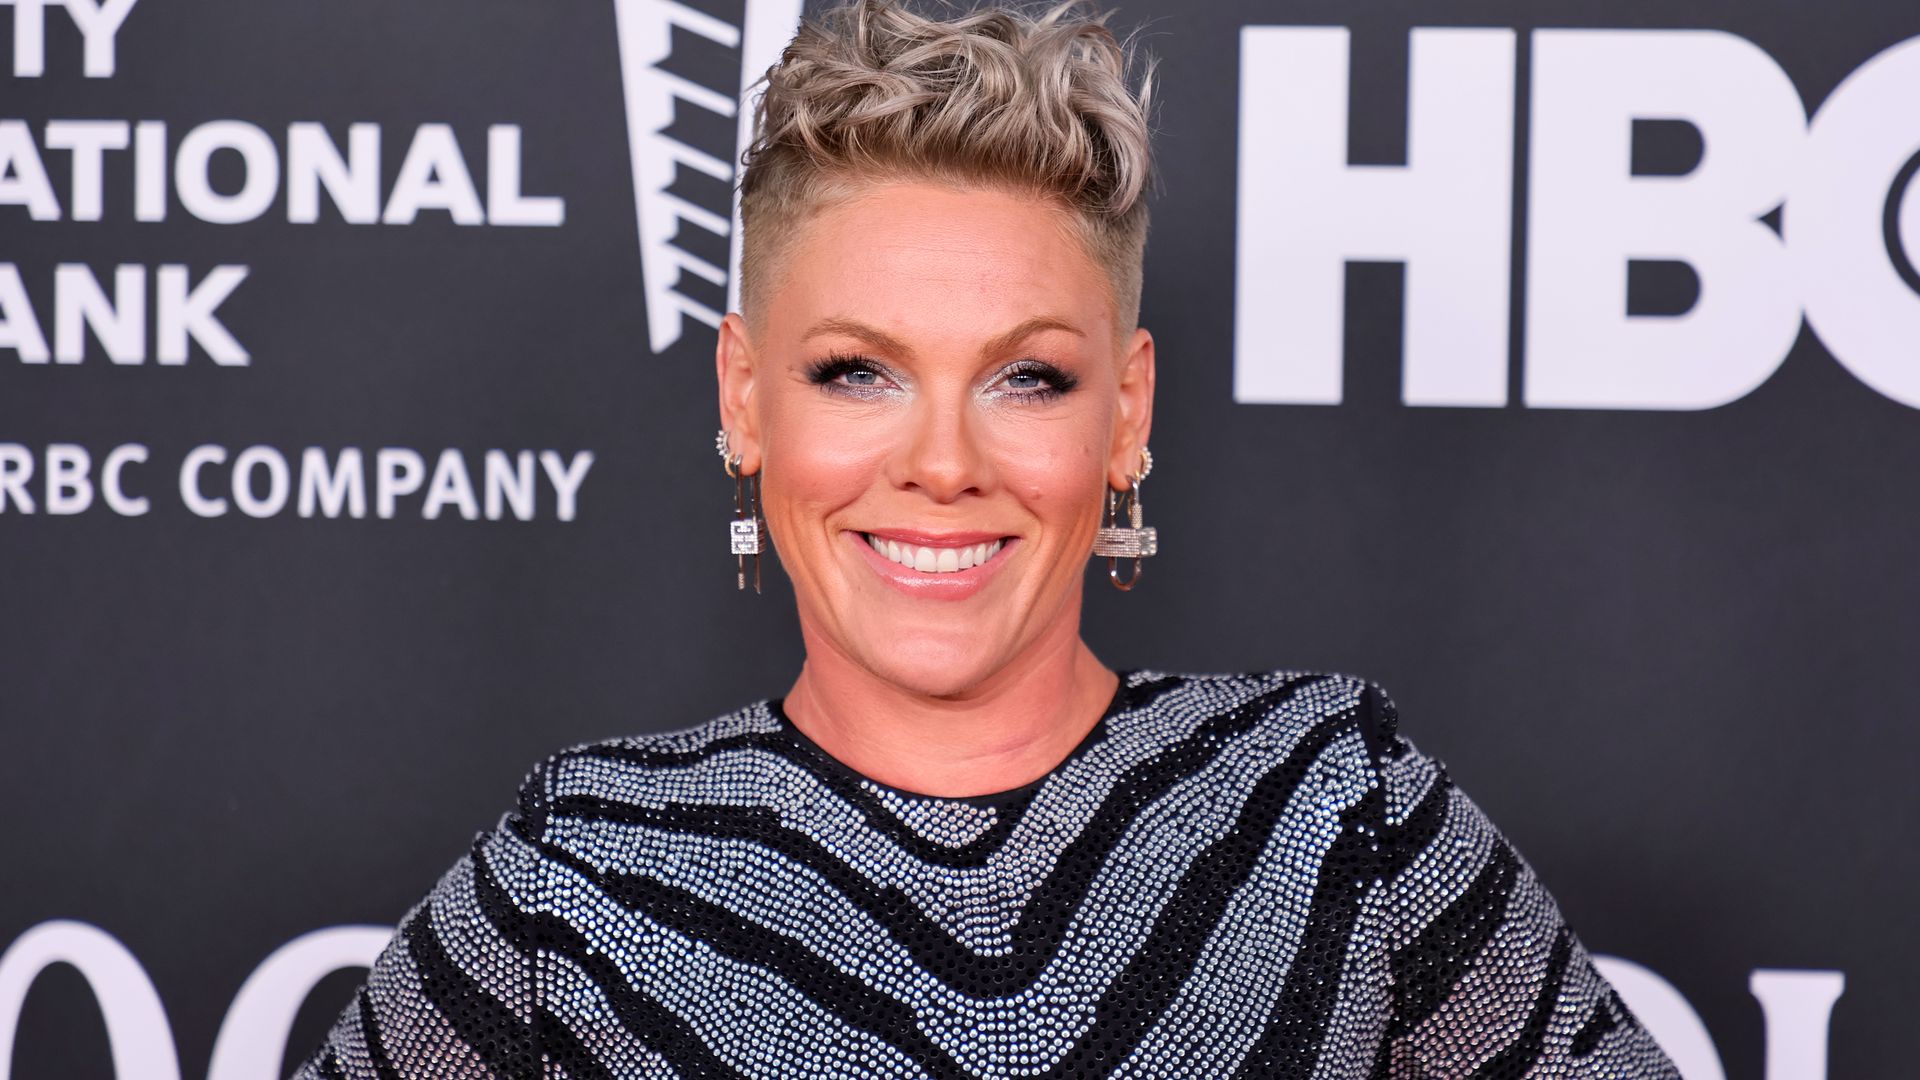 P!nk attends the 37th Annual Rock & Roll Hall of Fame Induction Ceremony at Microsoft Theater on November 05, 2022 in Los Angeles, California. (Photo by Theo Wargo/Getty Images for The Rock and Roll Hall of Fame)